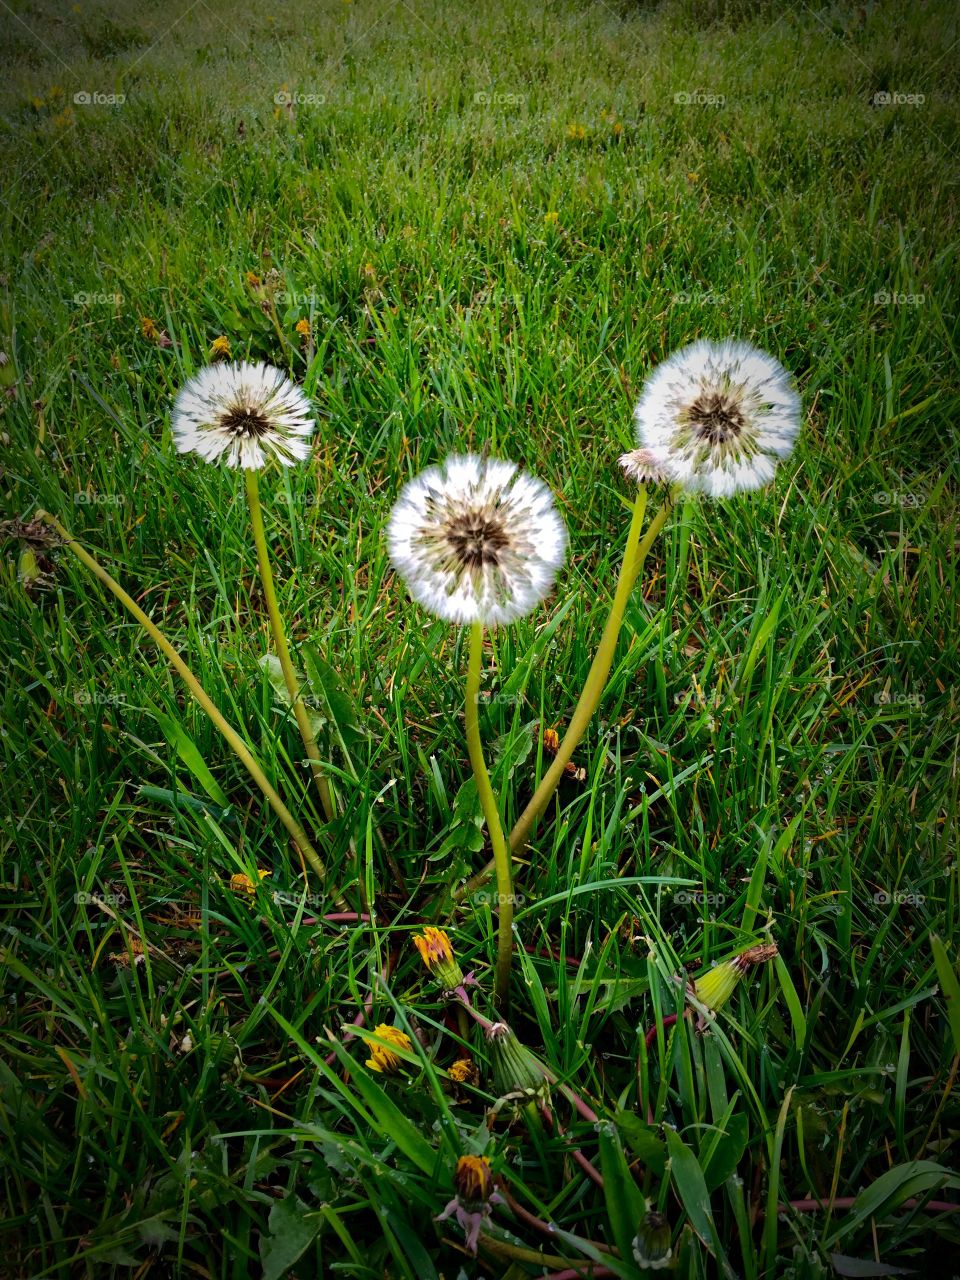 Dandelions Can Be Pretty Too